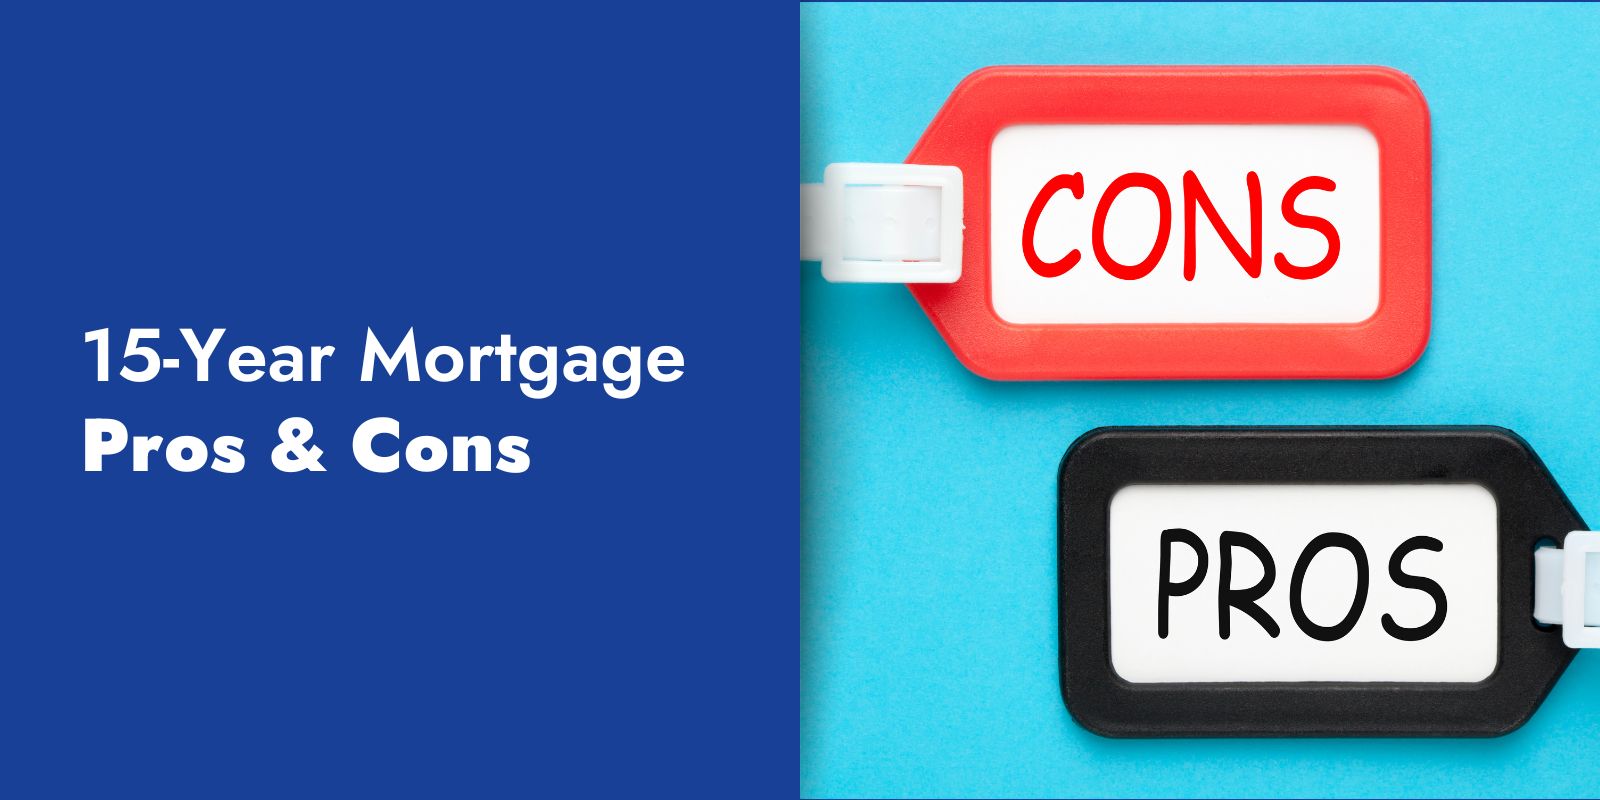 15-Year Mortgage Pros & Cons